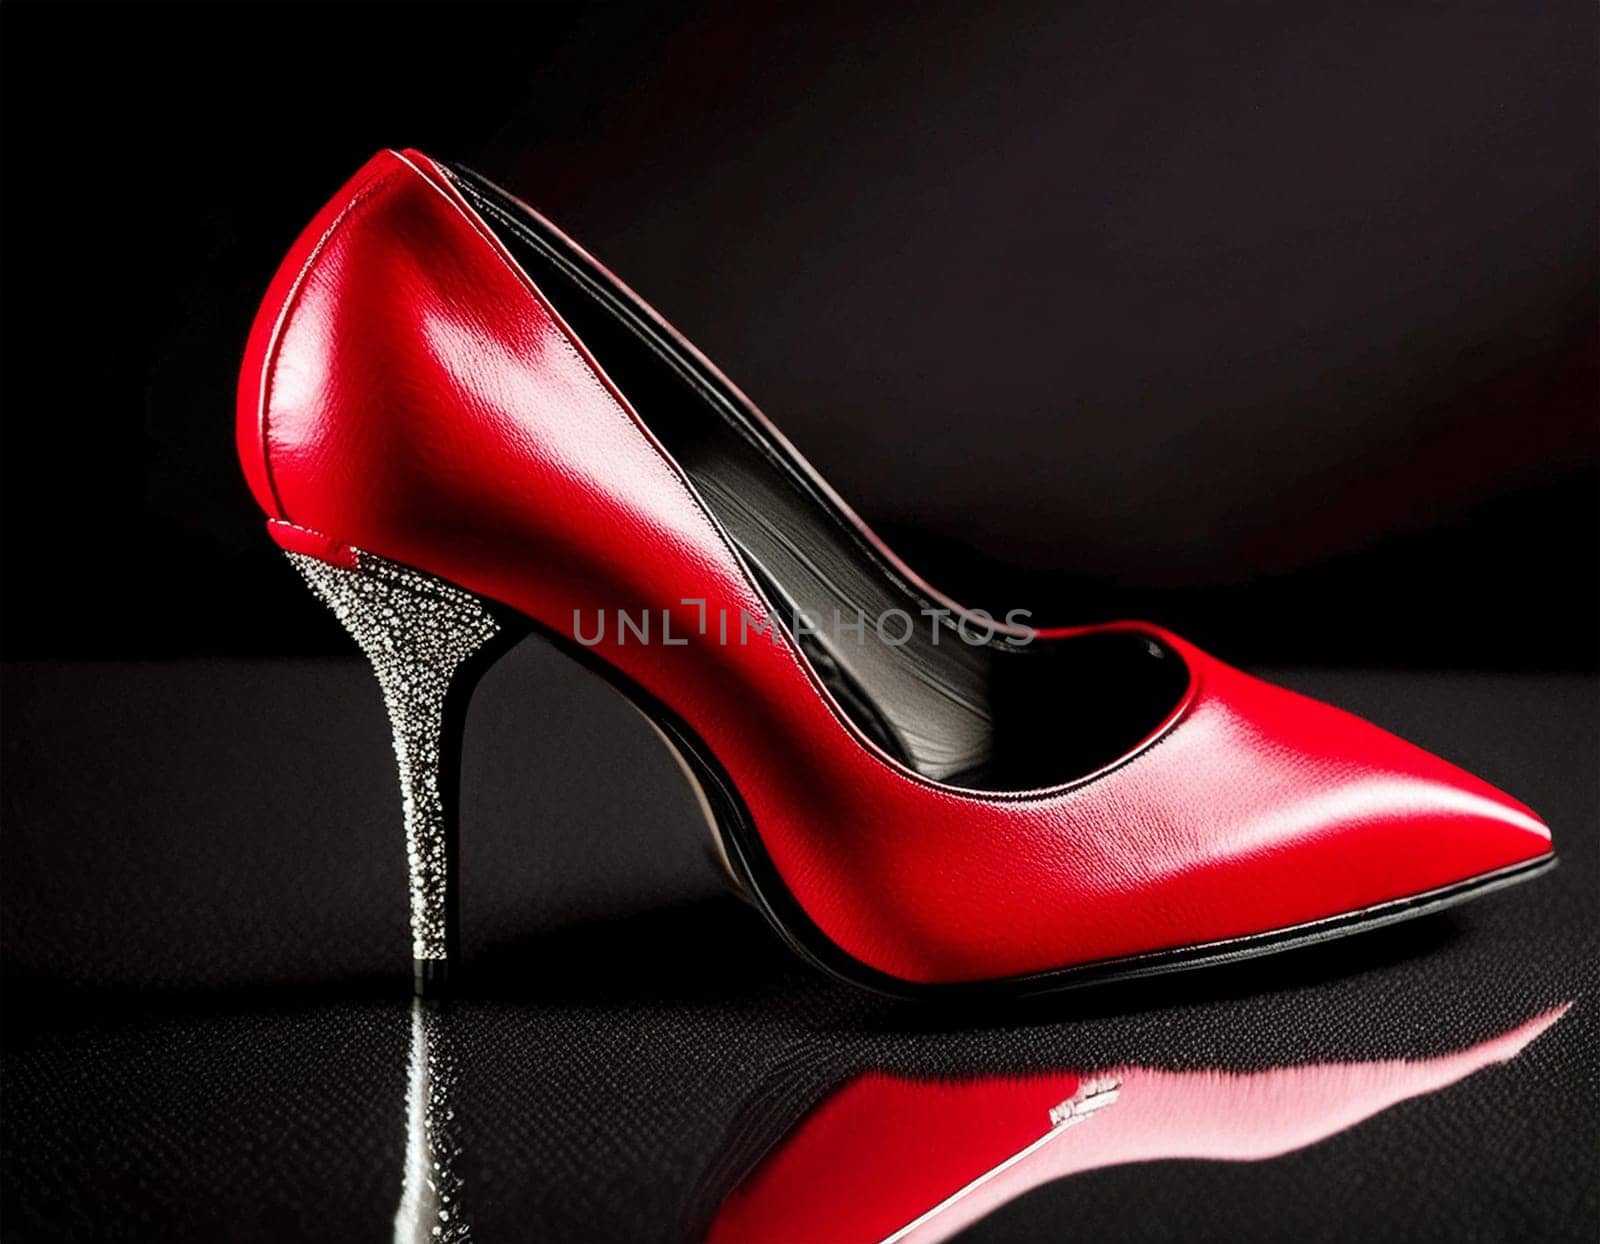 A woman's weapons, red heels. concept sex symbol,